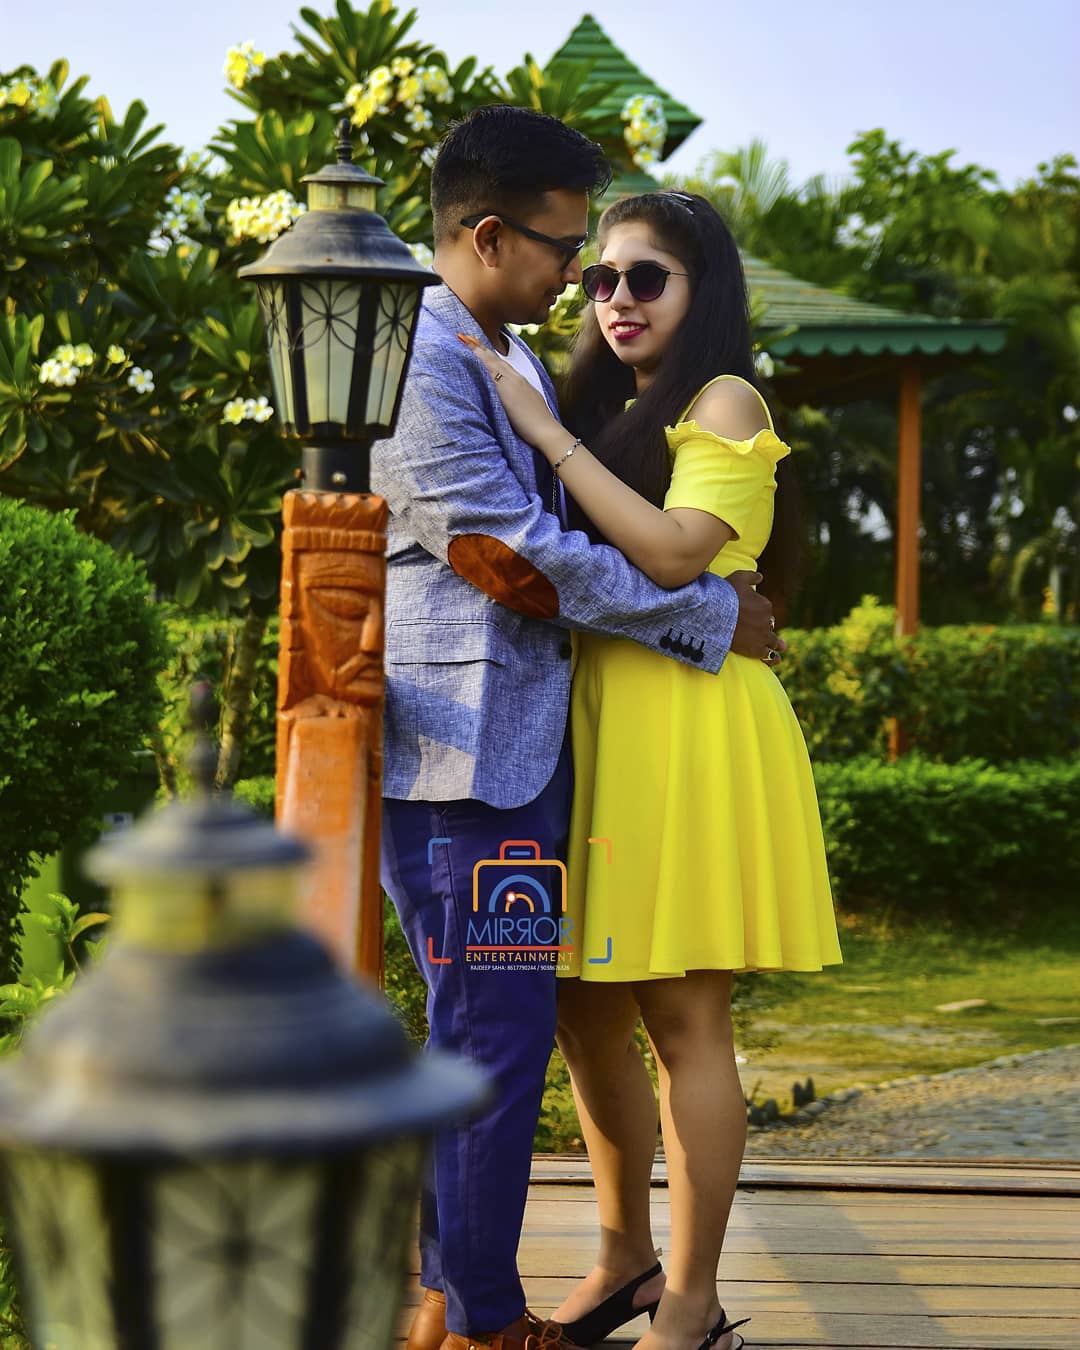 Pin by Joan C on pre wedding photos | Photoshoot outfits, Photo poses for  couples, Couple photoshoot poses